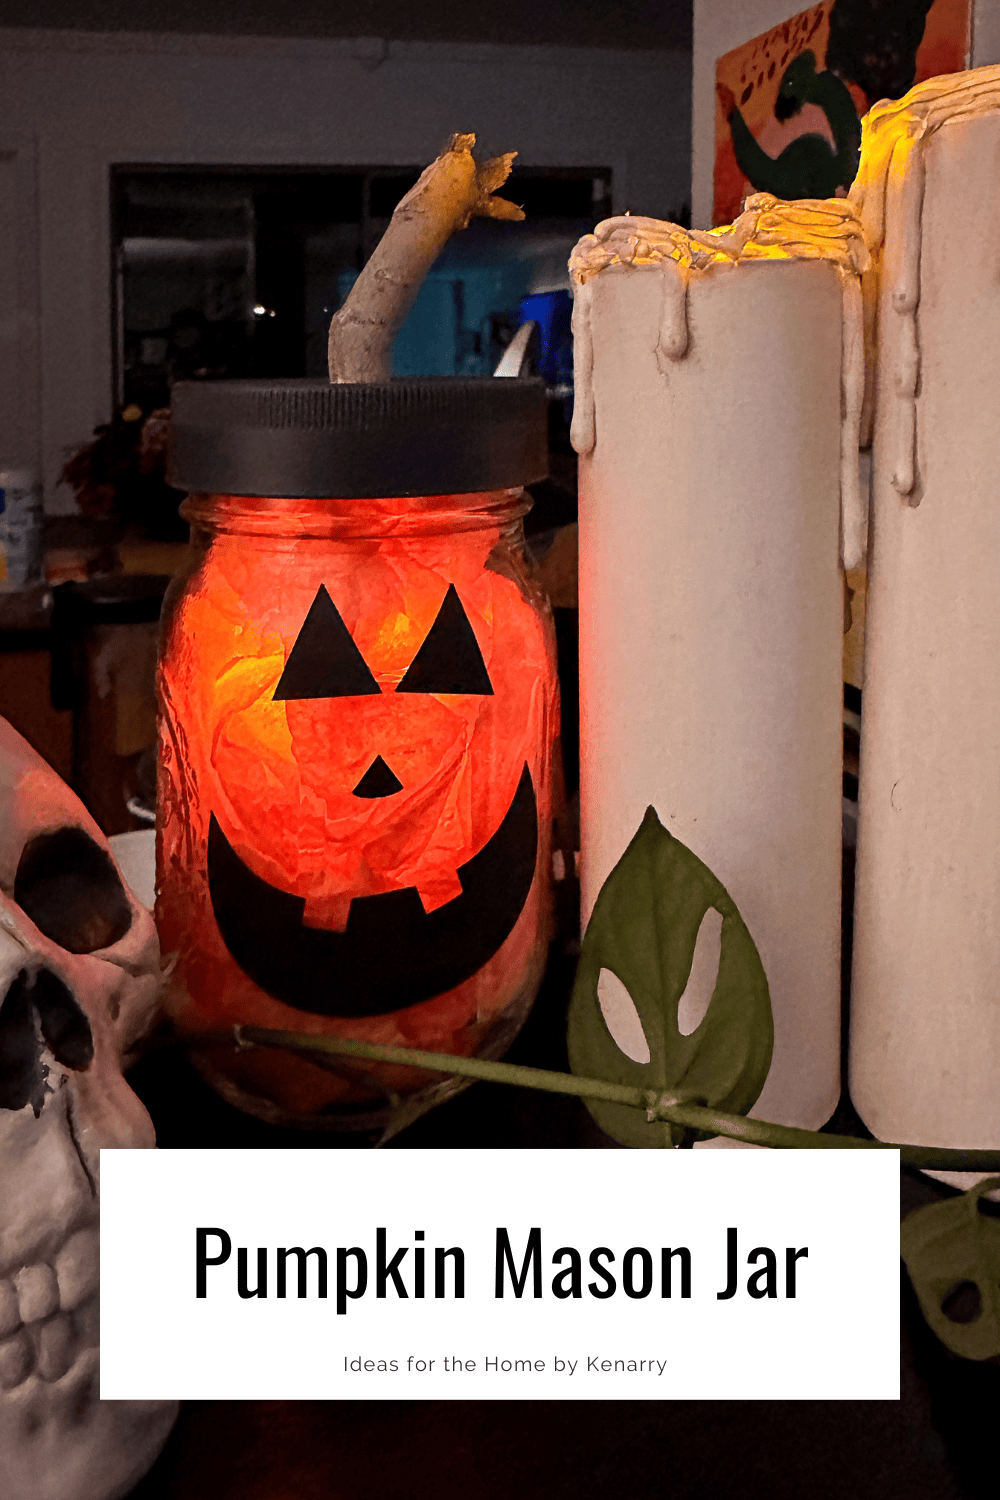 Mason Jar pumpkin sitting next to candles and a skull with a plant in front.